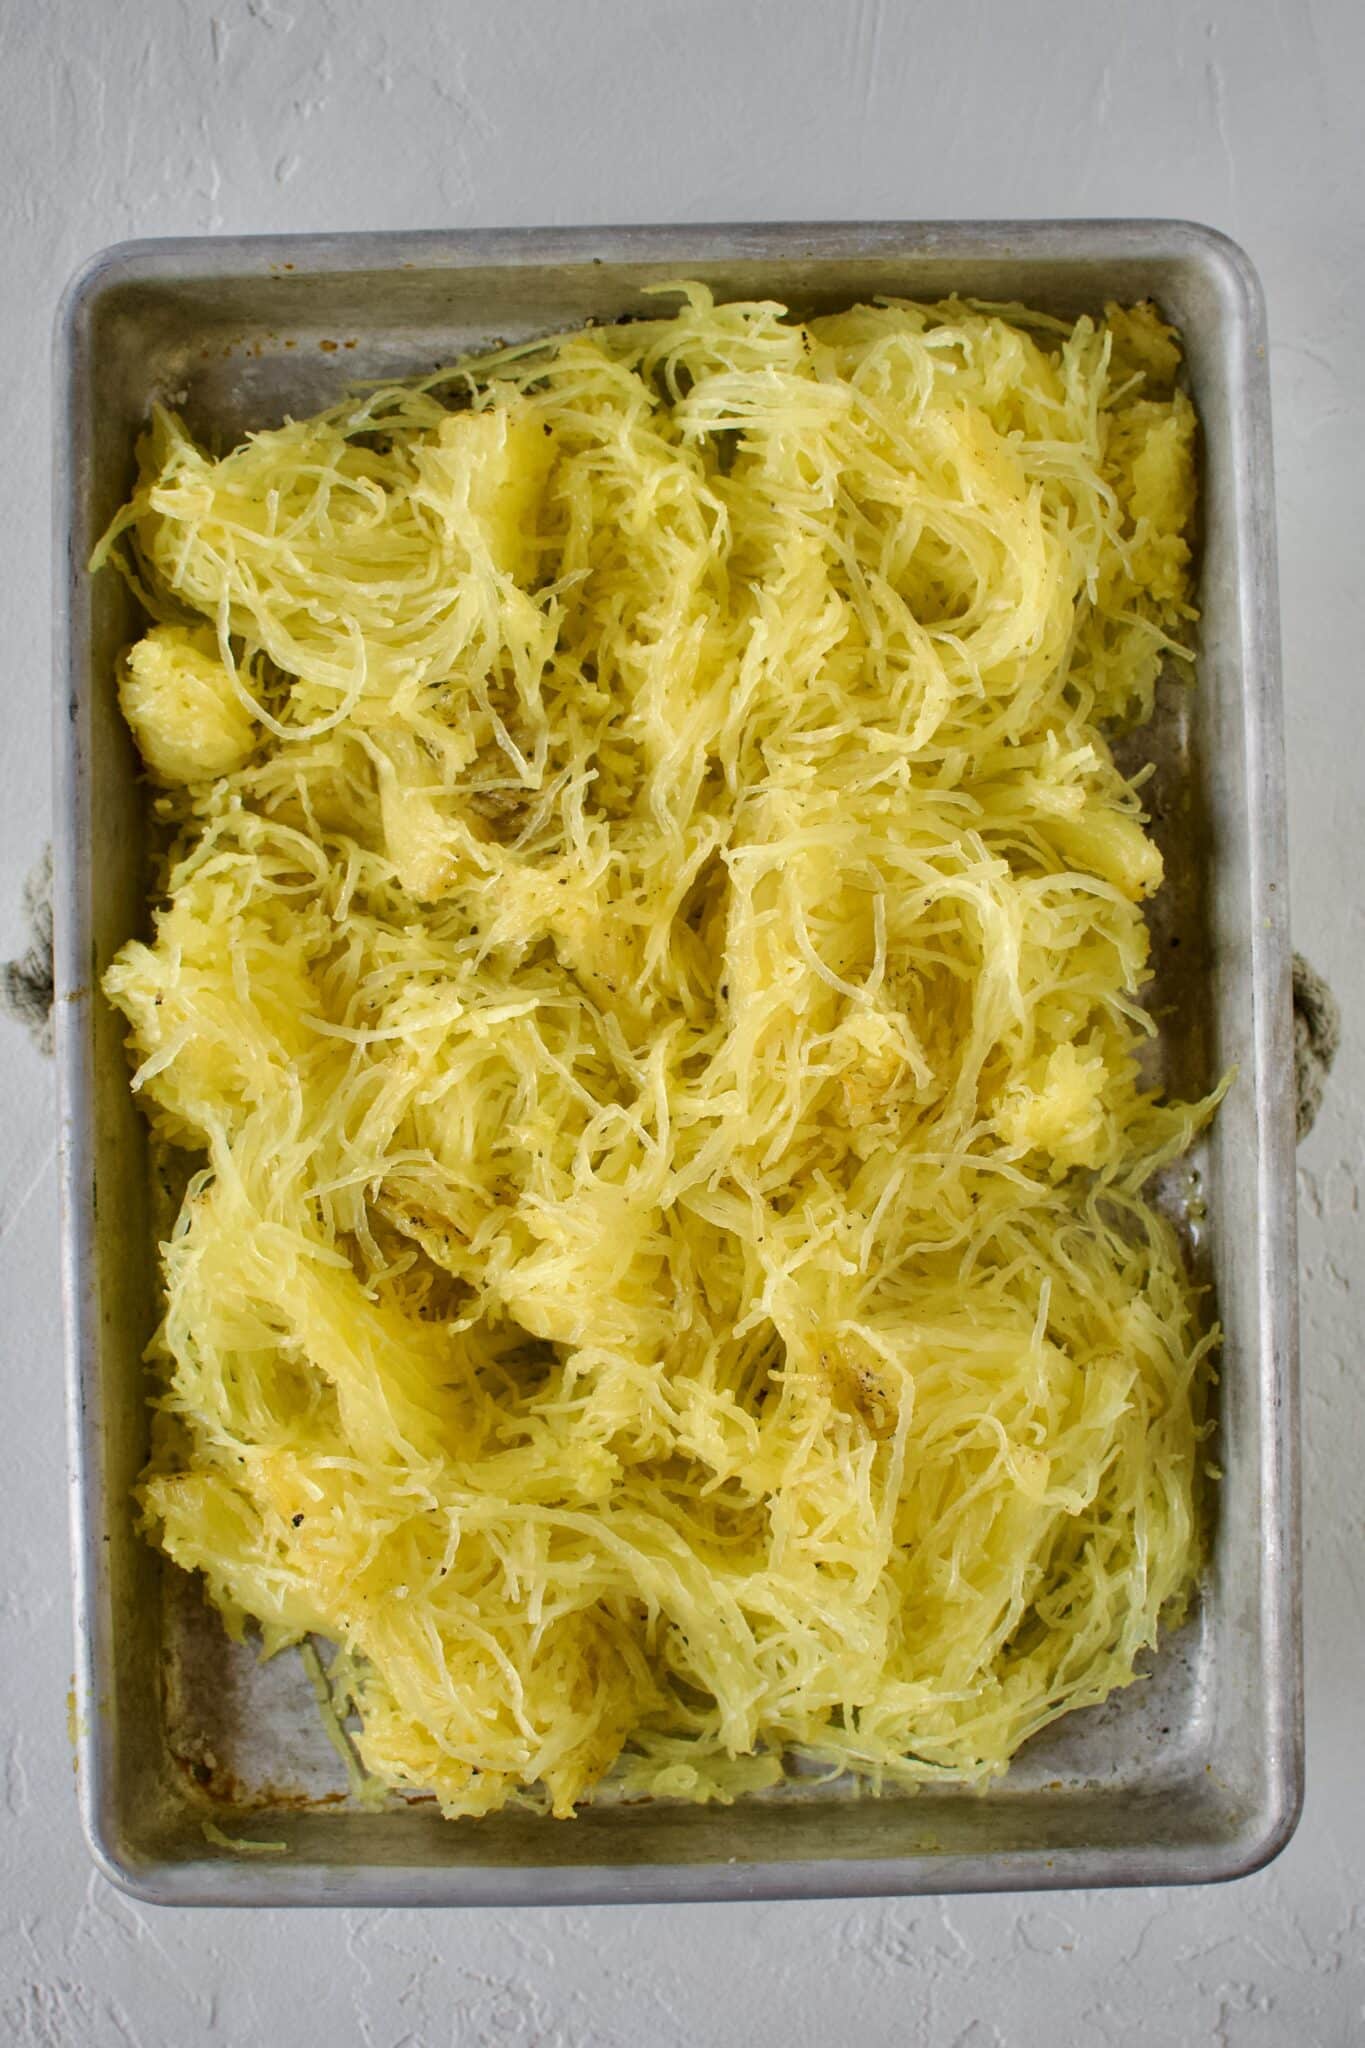 Roasted Spaghetti Squash after roasting and removing it from the skin.